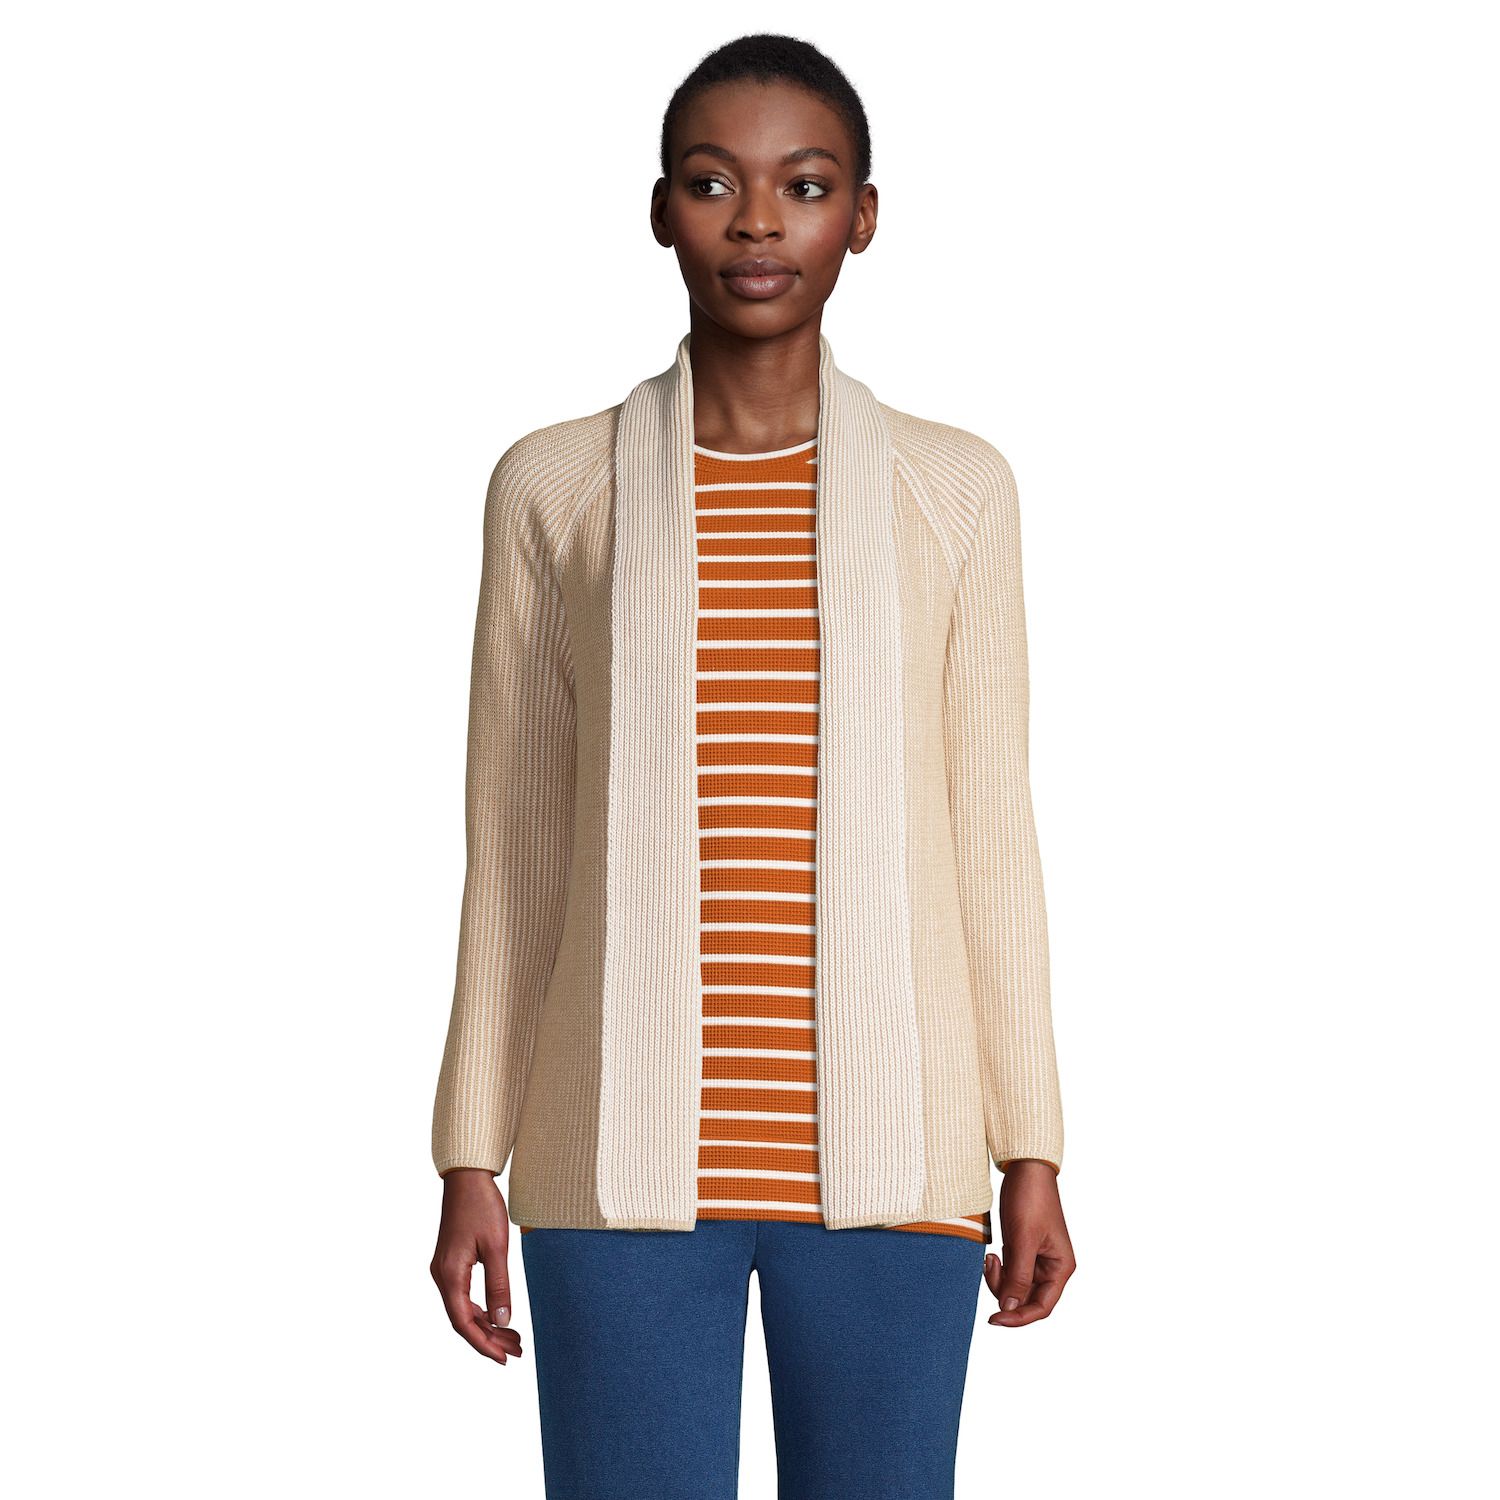 Image for Lands' End Women's Drifter Shaker Open-Front Cardigan Sweater at Kohl's.